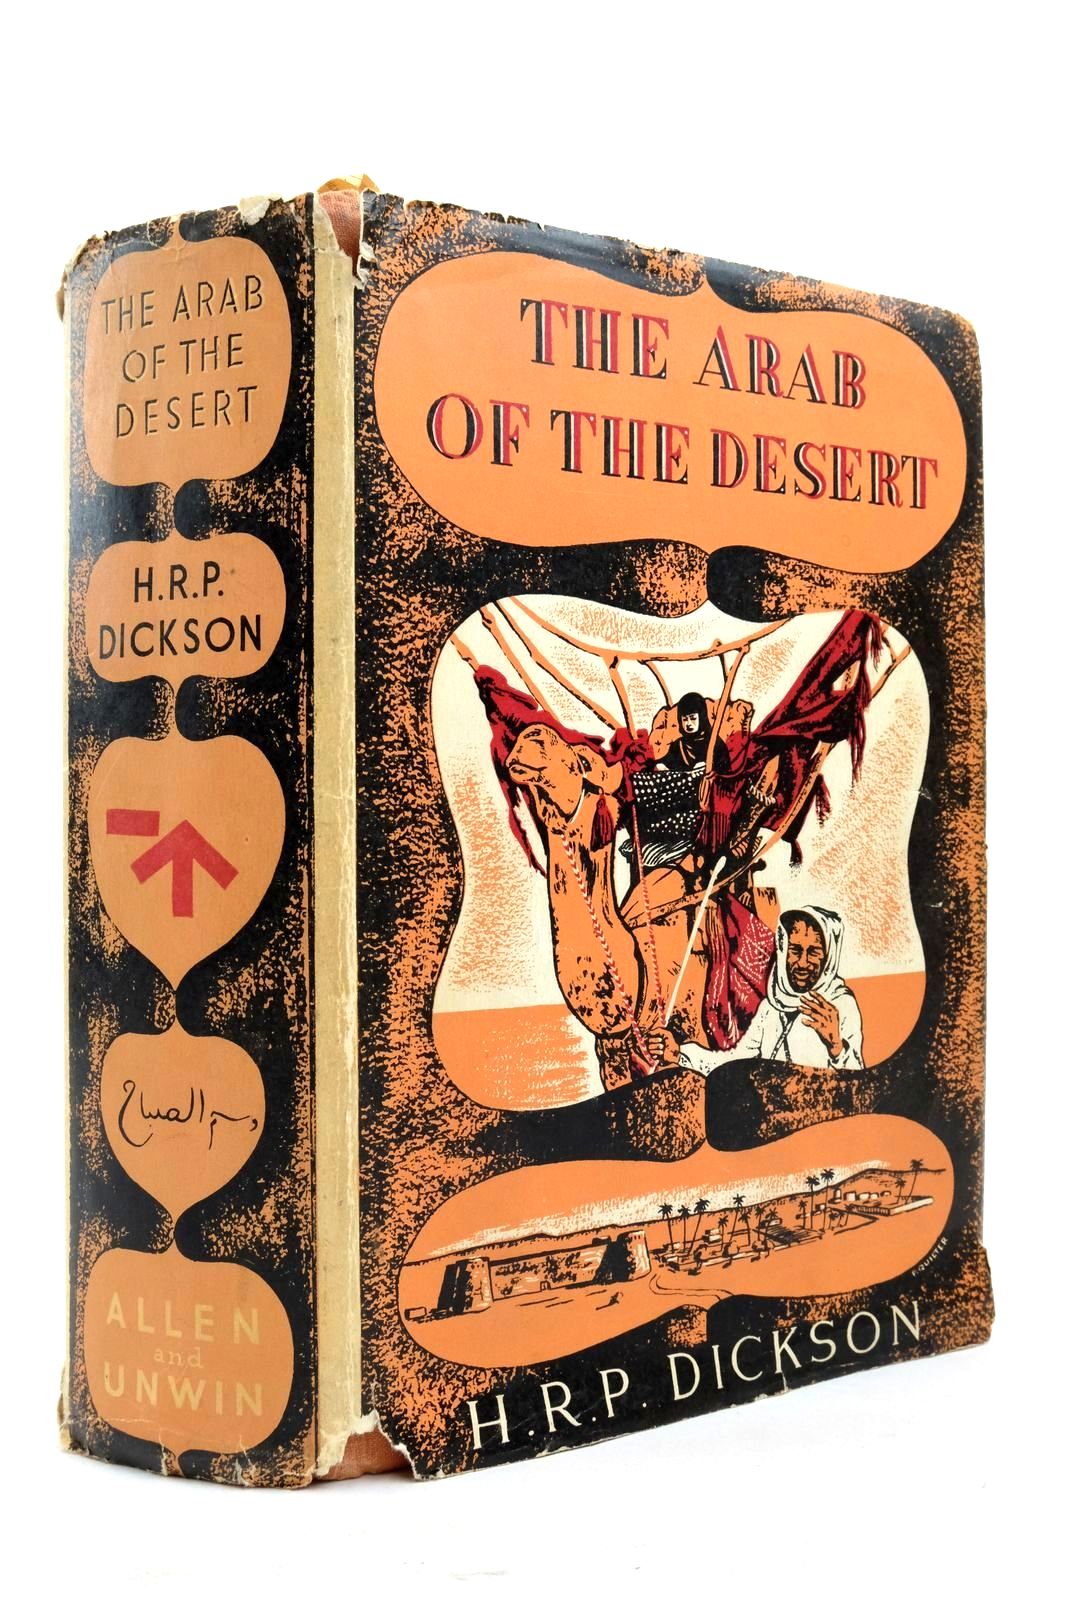 Photo of THE ARAB OF THE DESERT written by Dickson, H.R.P. published by George Allen &amp; Unwin Ltd. (STOCK CODE: 2137743)  for sale by Stella & Rose's Books